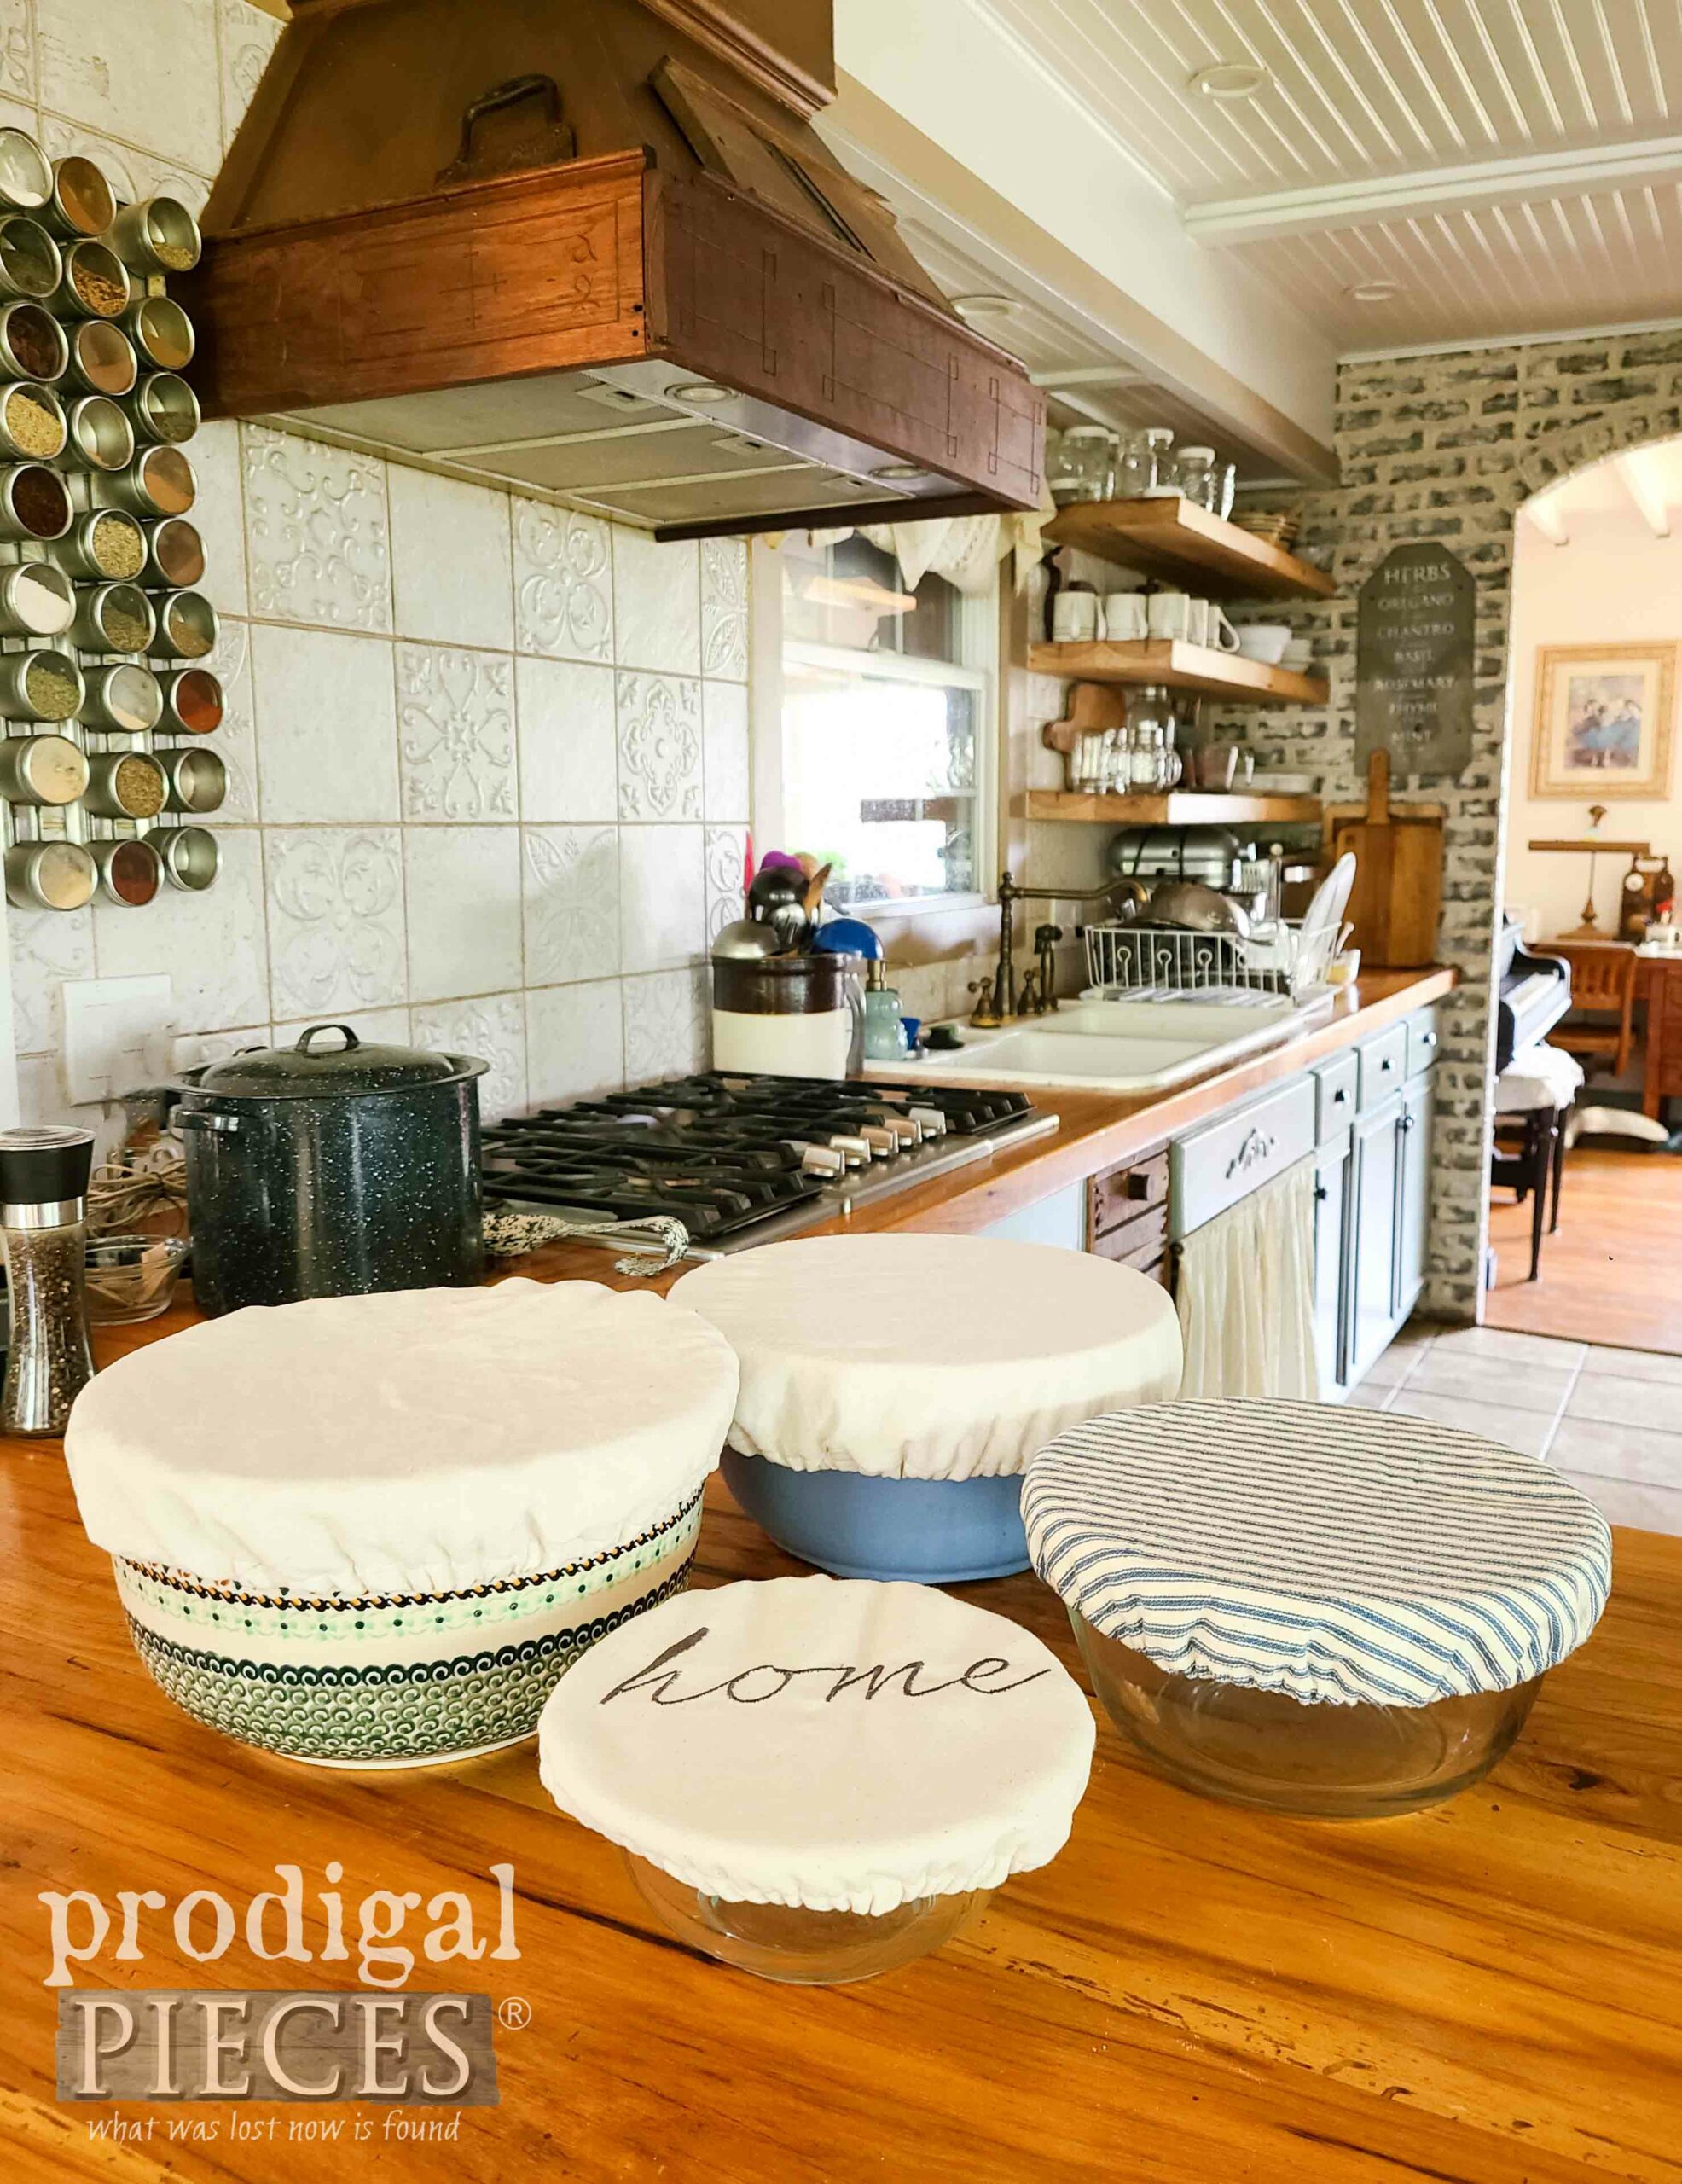 Farmhouse Kitchen DIY Bowl Cover with Moisture Lining Tutorial by Larissa of Prodigal Pieces | prodigalpieces.com #prodigalpieces #farmhouse #refashion #diy #sewing